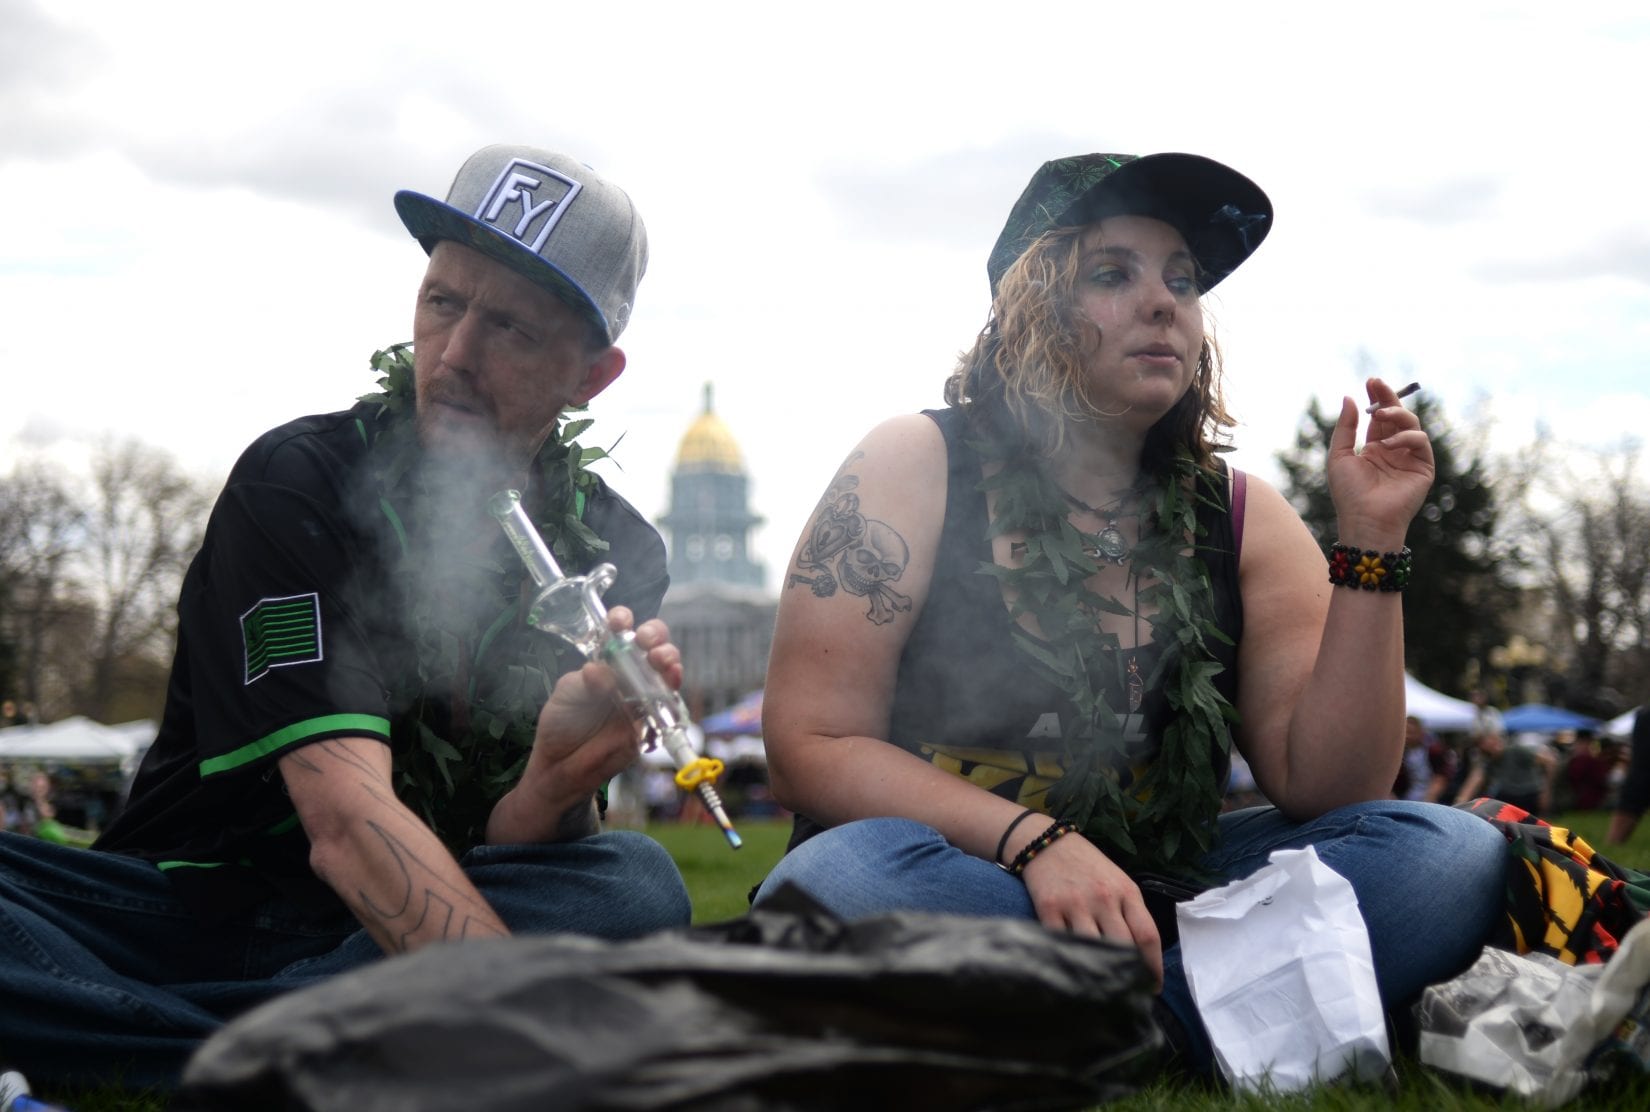 Crowds roll up for annual 4/20 smoke-in at Denver's Civic Center